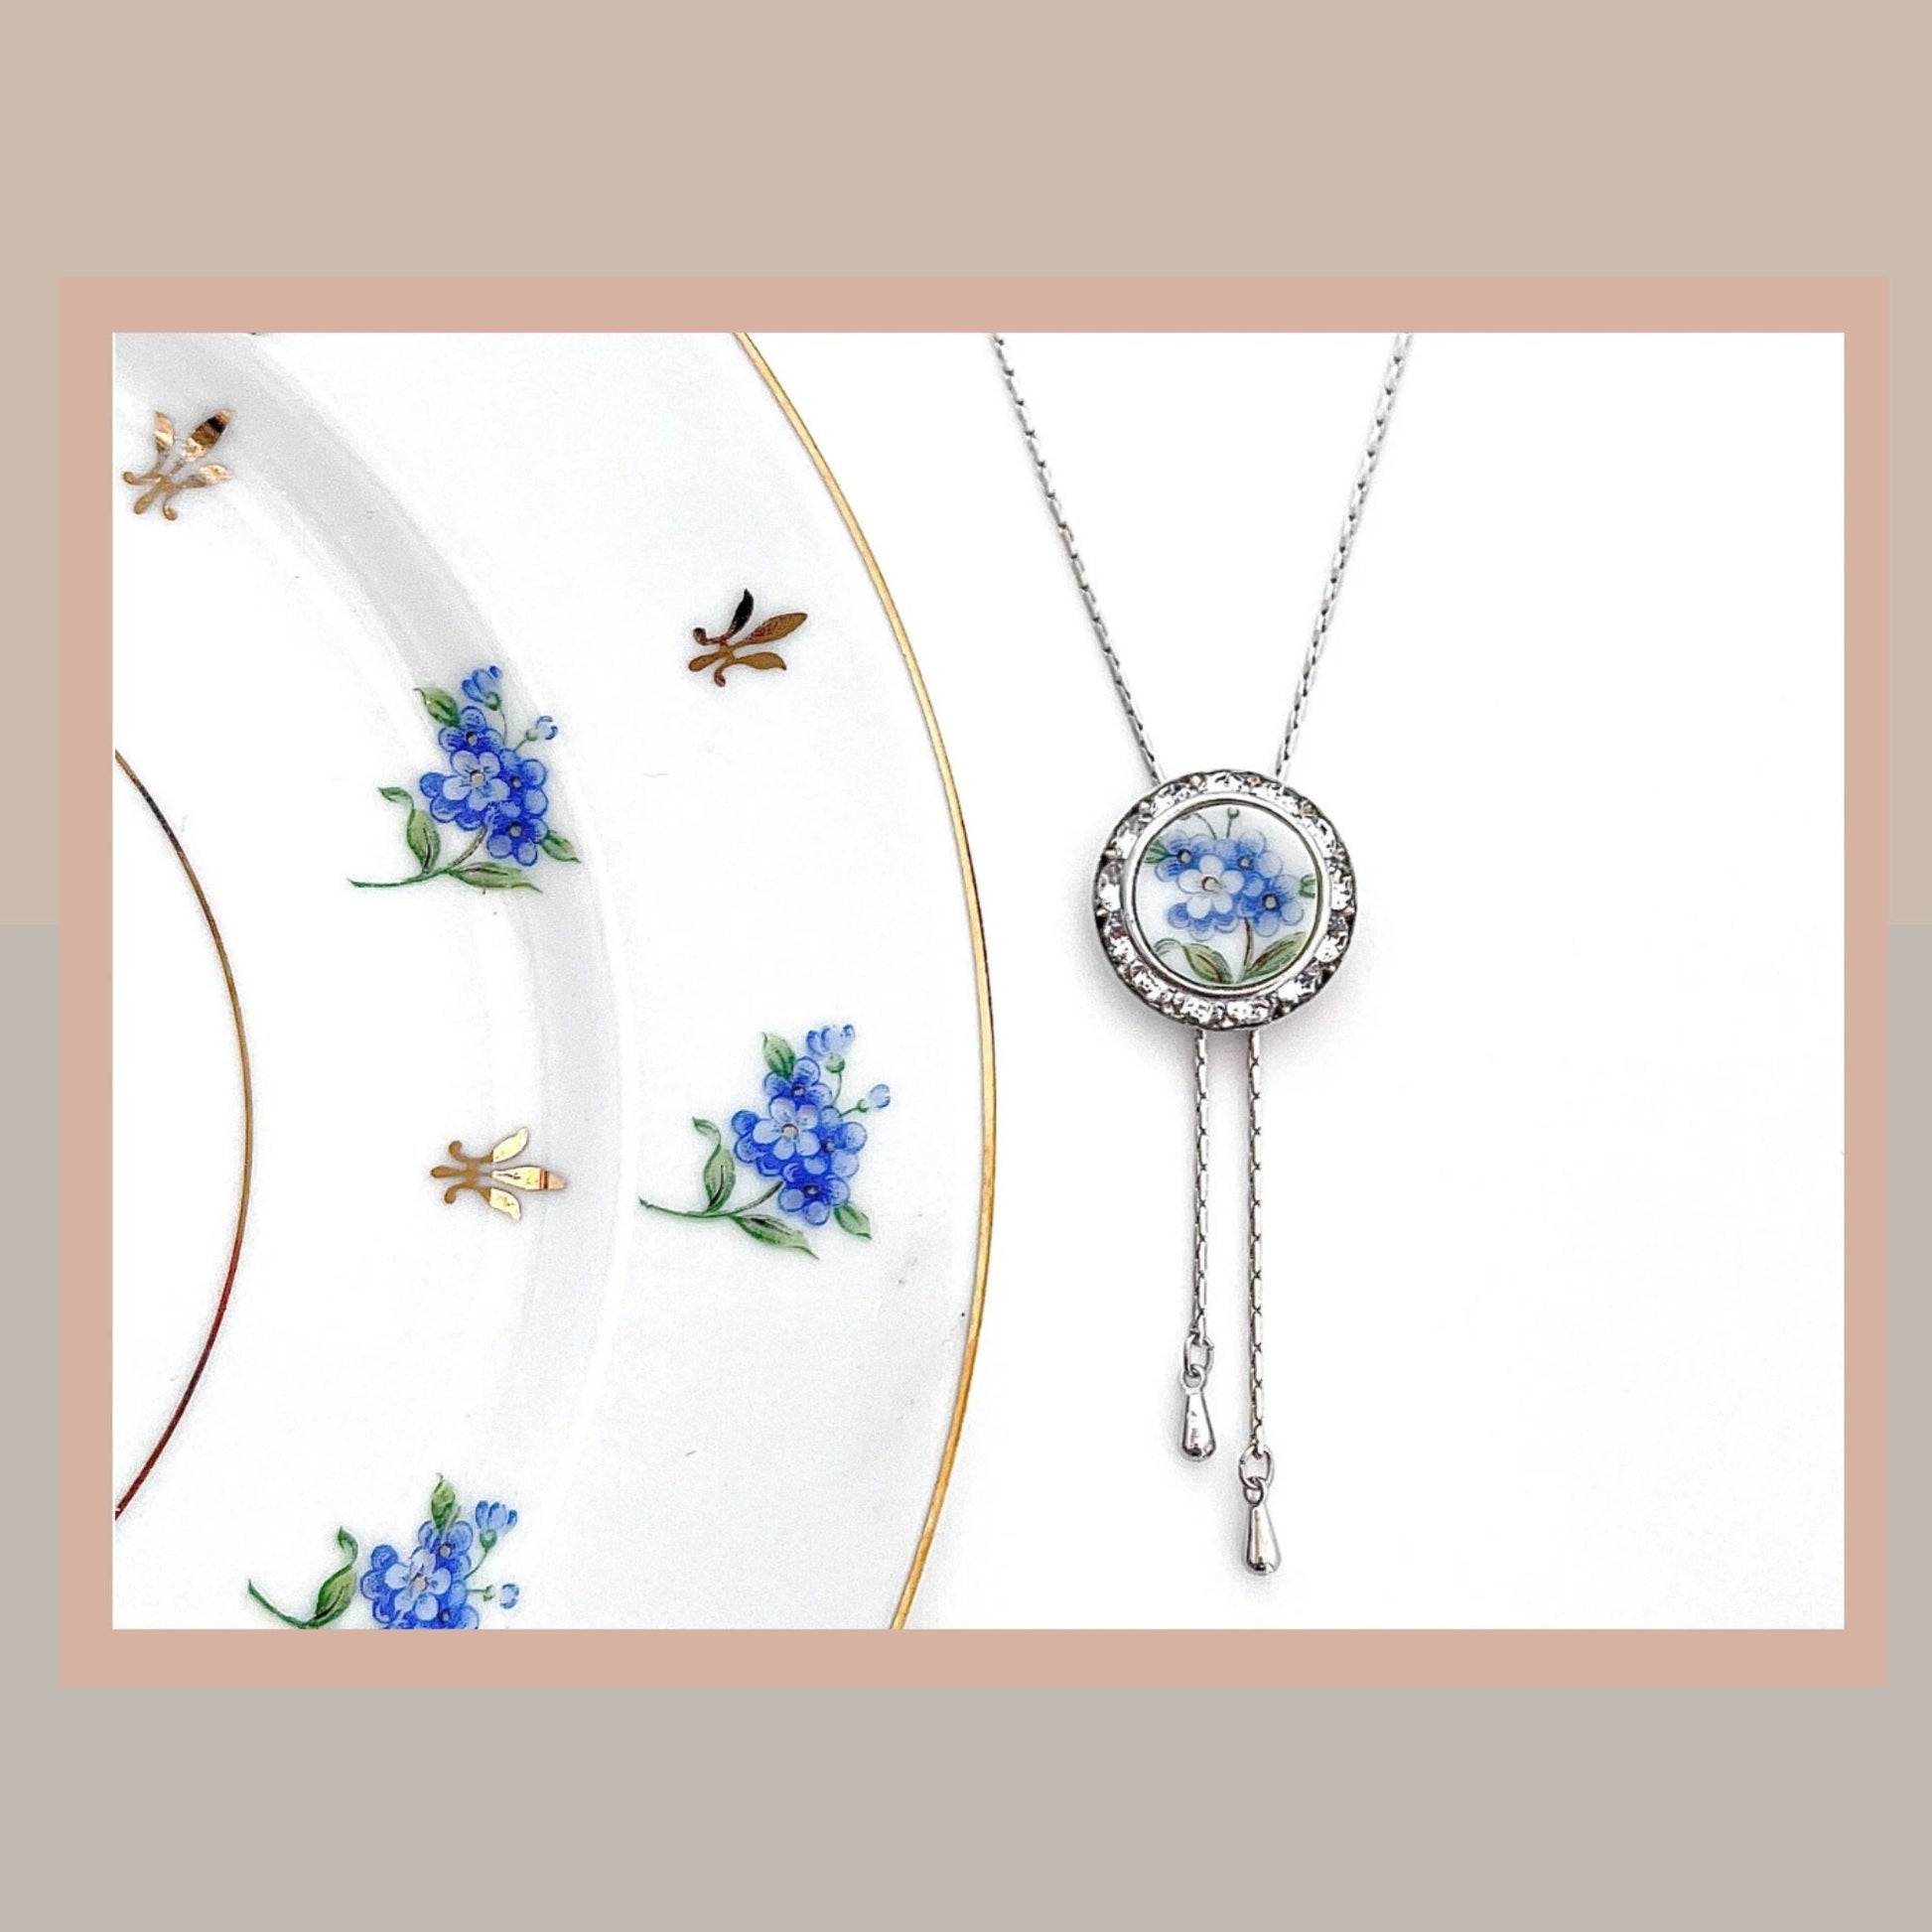 Adjustable Forget Me Not Necklace, Broken China Jewelry Lariat, Long Crystal Necklace, Unique Birthday Gifts for Her